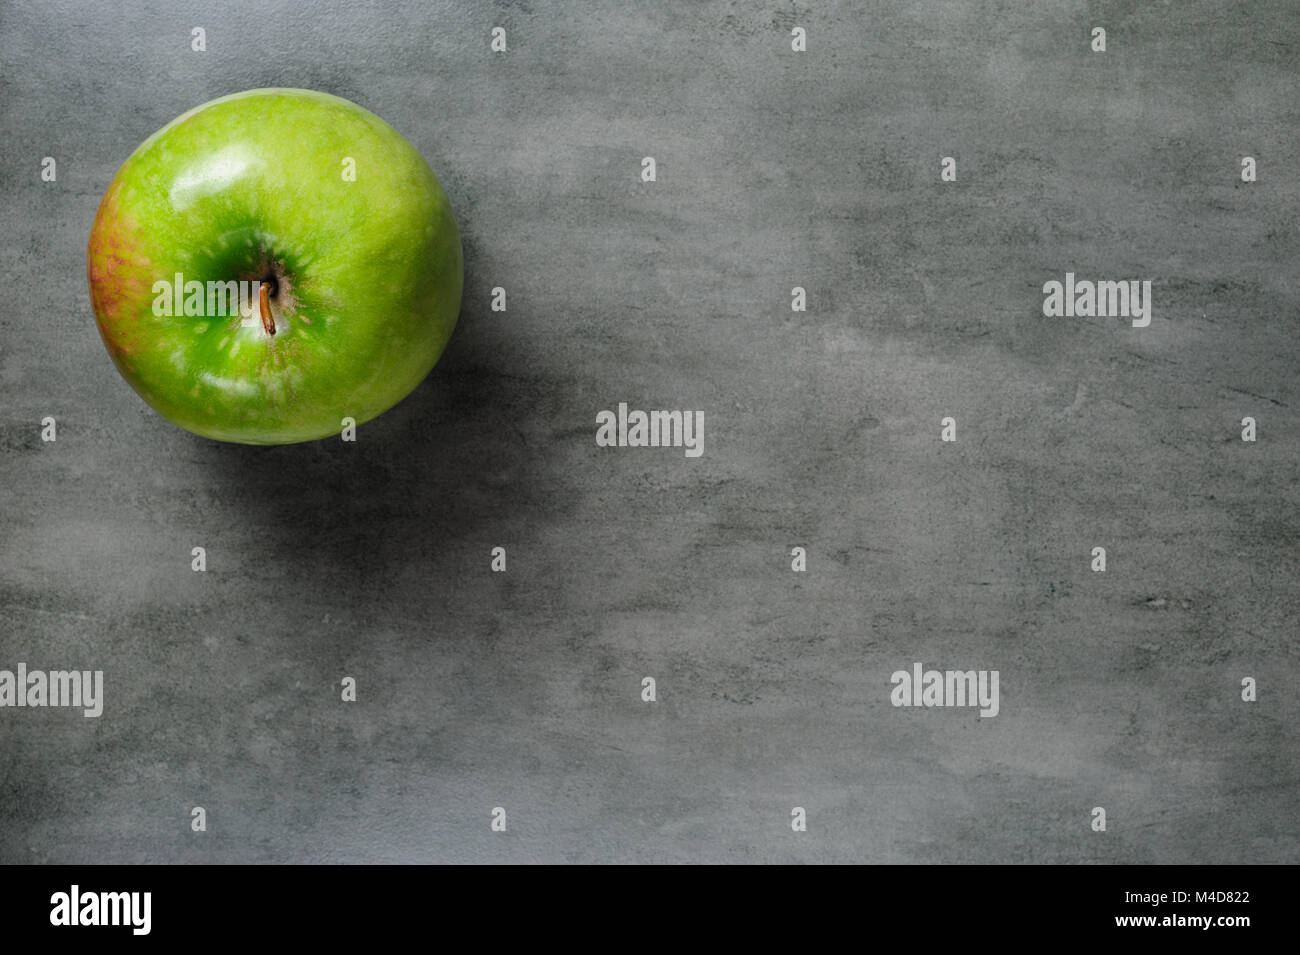 one green apple on dark stone background, top view. Stock Photo